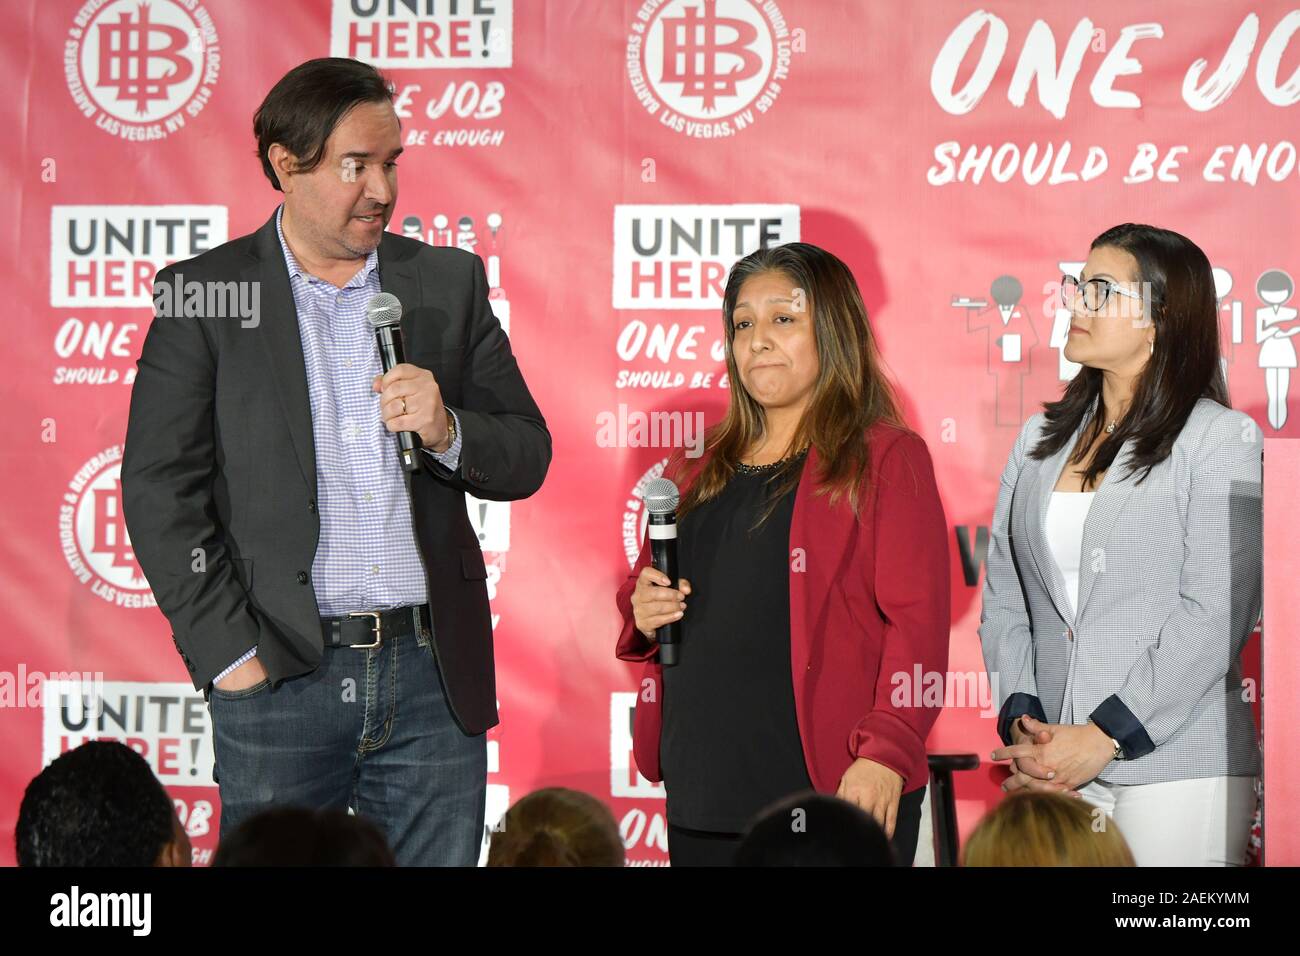 Las Vegas, NV, USA. 9th Dec, 2019. Immigration Lawyer, Anibal Romero with Victorina Morales and Sandra Diaz, former undocumented workers at Trump National Golf Club in Bedminster, N.J., speaks at UNITE HEREÕs Culinary Union Town Hall with Senator Elizabeth Warren at Culinary Union in Las Vegas, Nevada on December 9, 2019. Credit: Damairs Carter/Media Punch/Alamy Live News Stock Photo